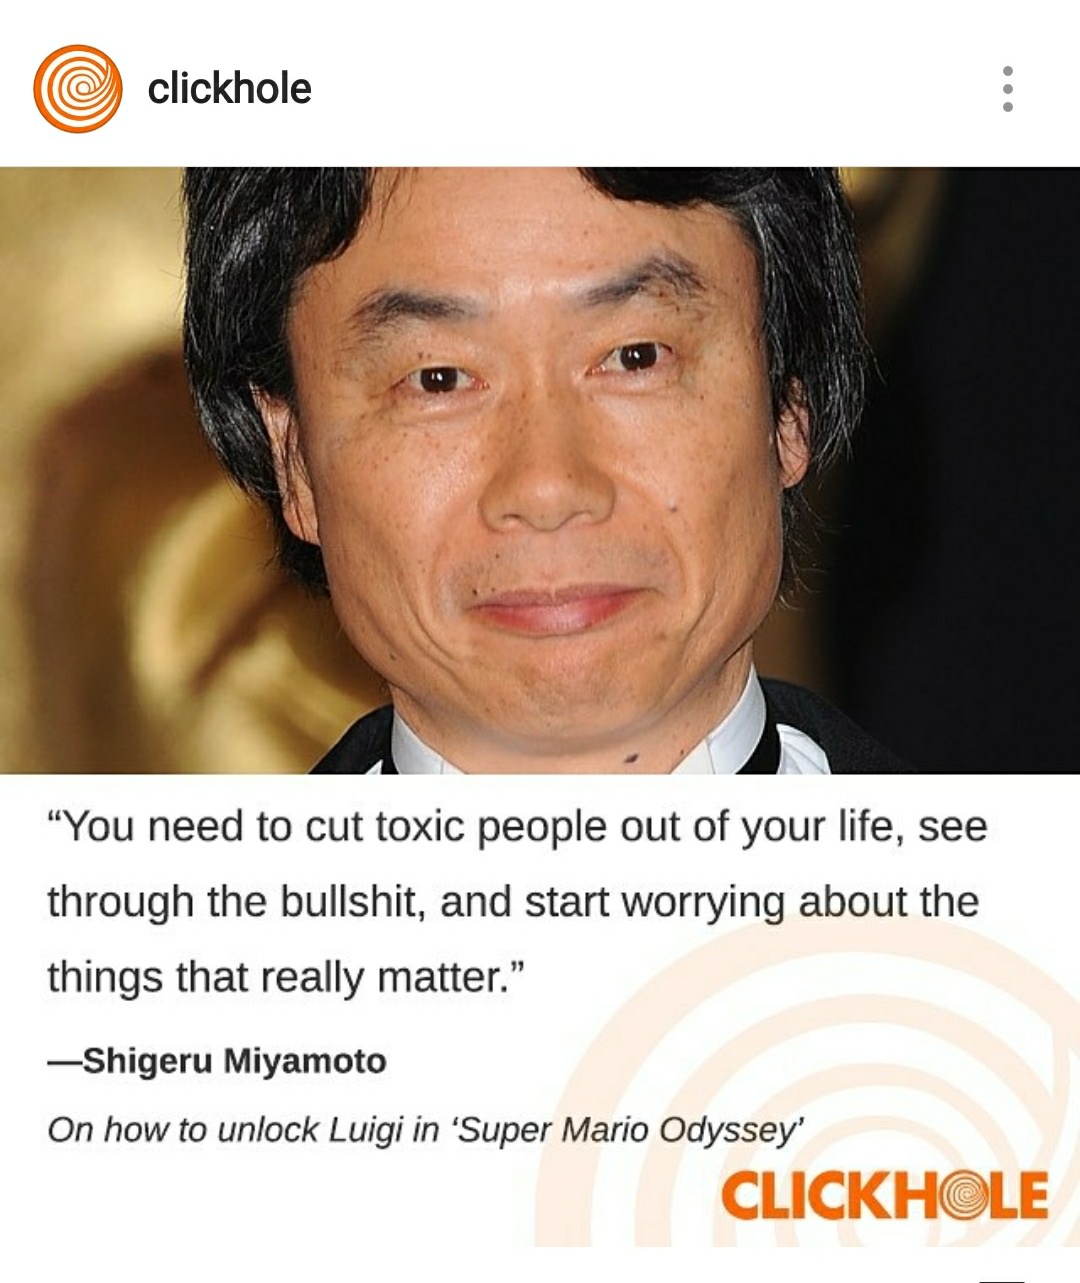 shigeru miyamoto clickhole - clickhole "You need to cut toxic people out of your life, see through the bullshit, and start worrying about the things that really matter." Shigeru Miyamoto On how to unlock Luigi in 'Super Mario Odyssey' Clickhole